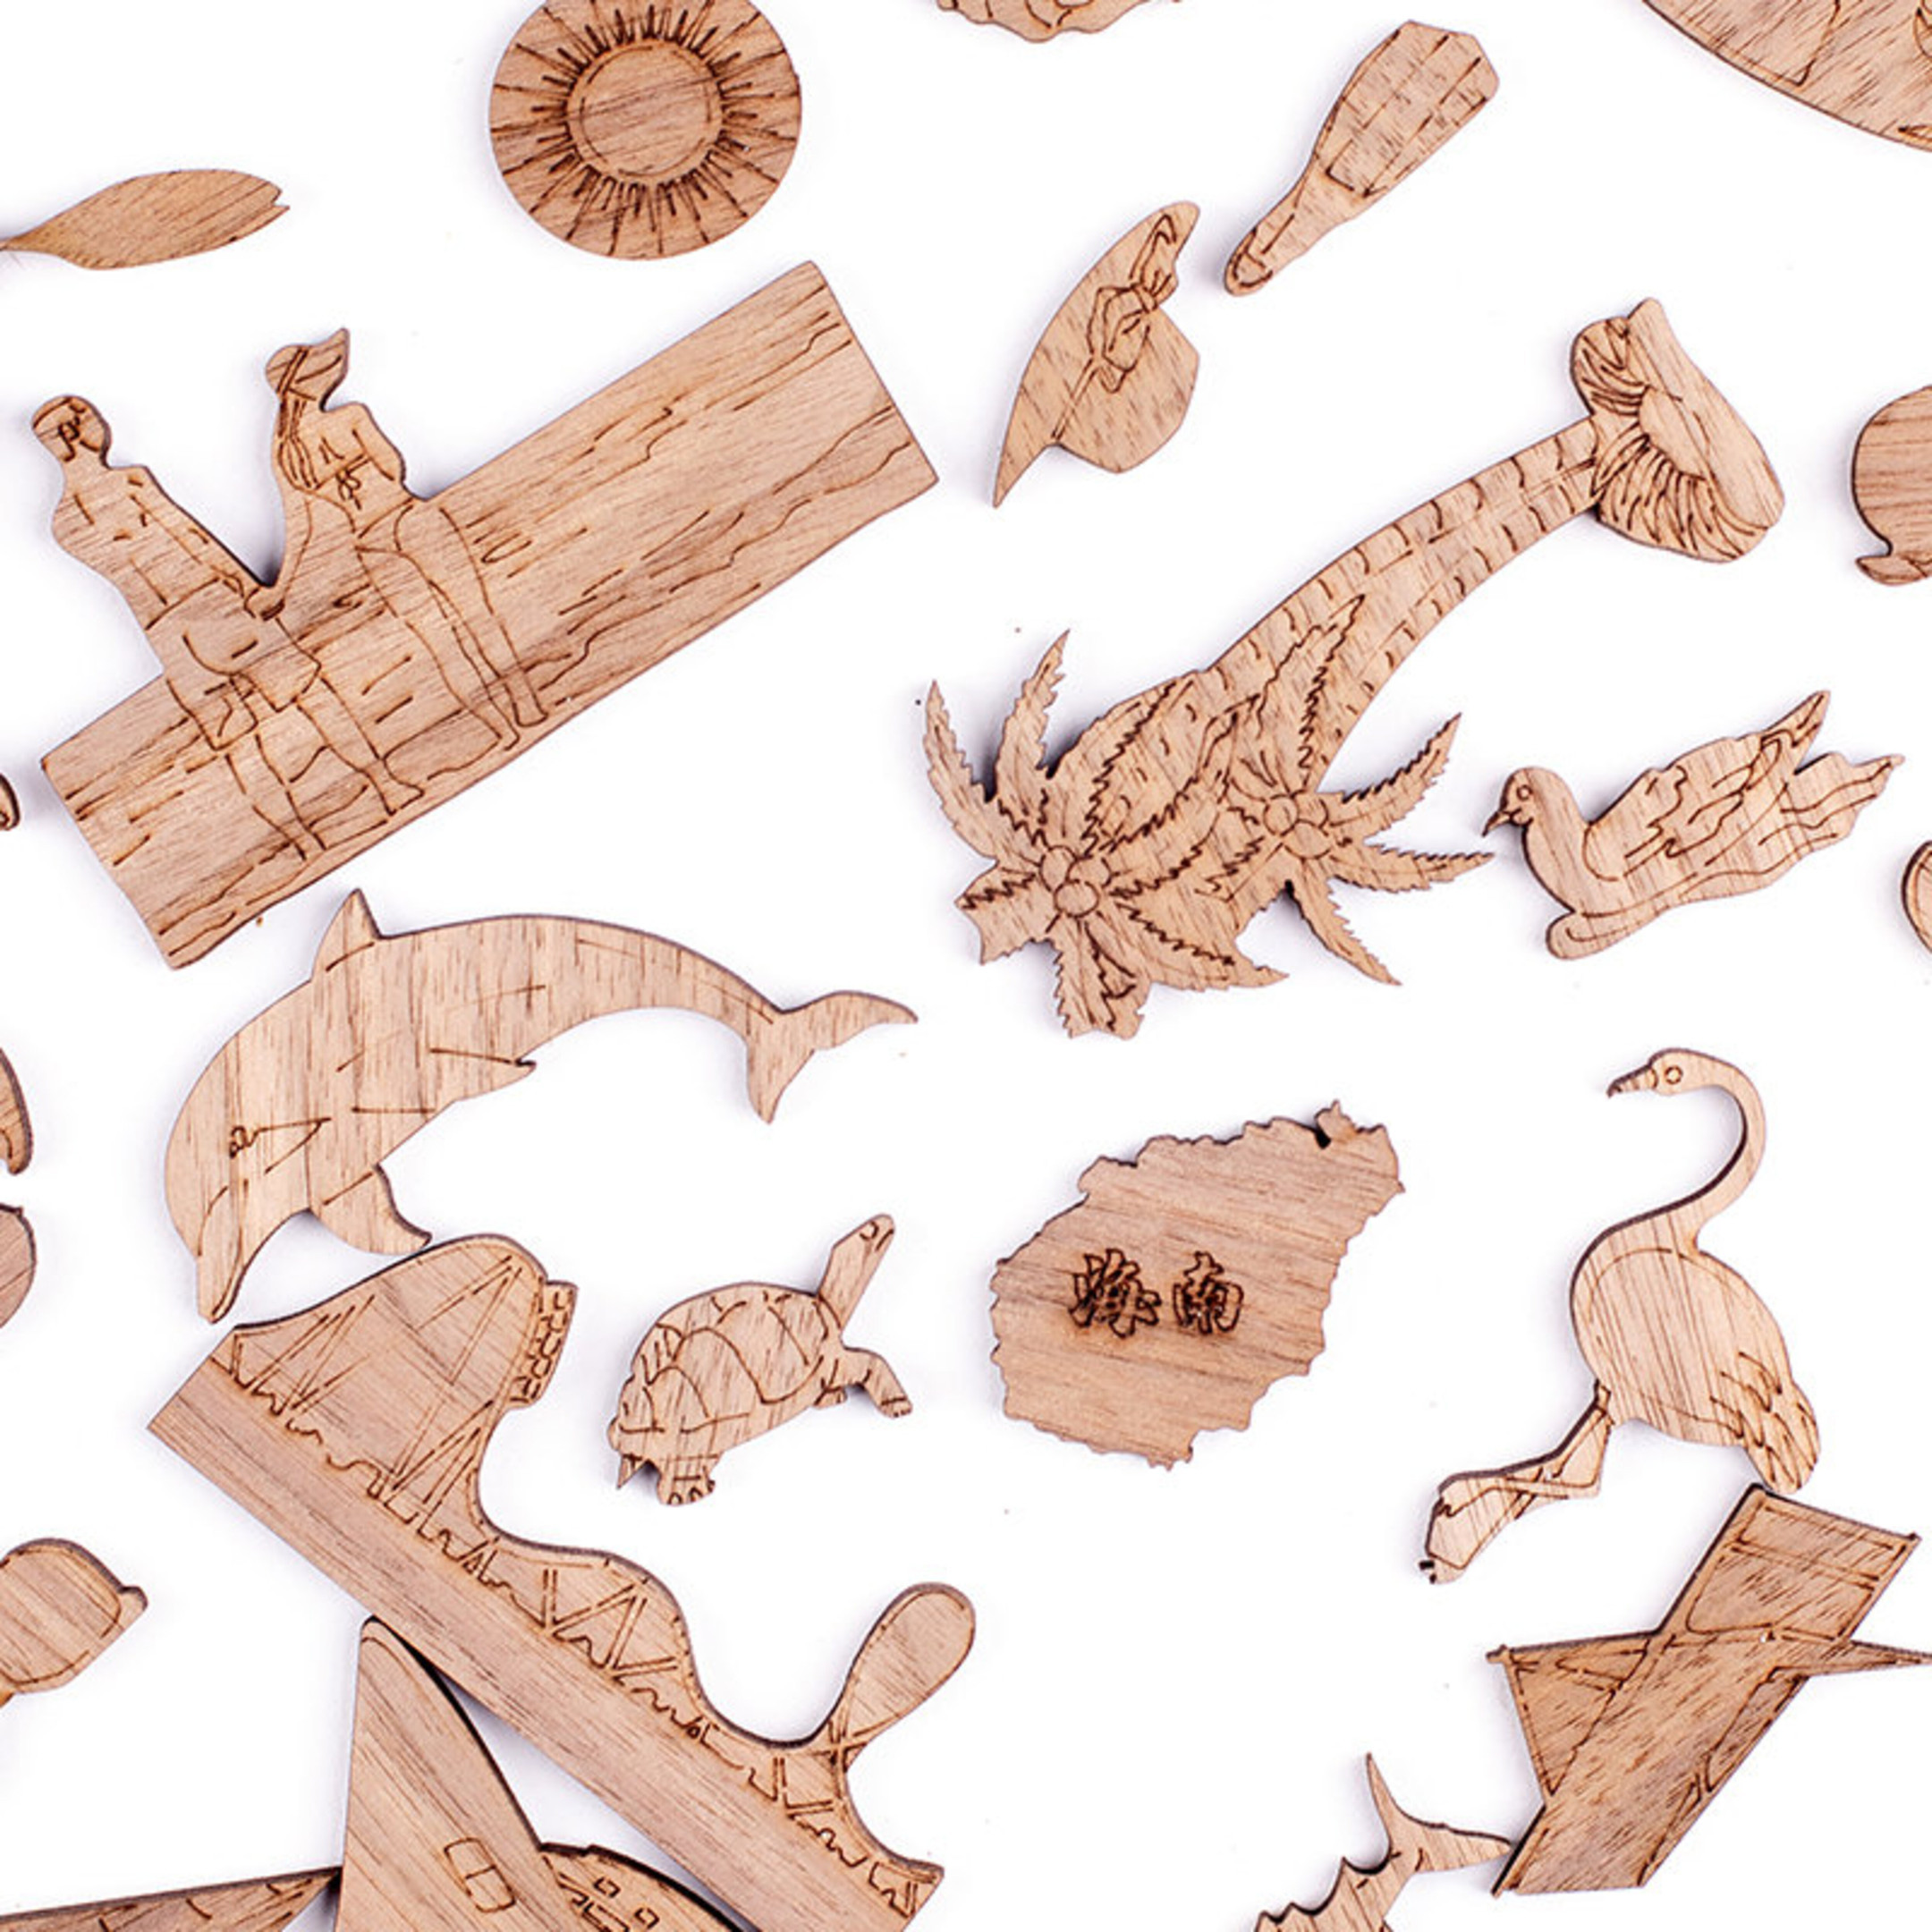 Wooden Jigsaw Puzzle, Premium Materials, Impressive Artwork, Ideal Gifts for Kids, Family Games, Kids & Adults Puzzles,